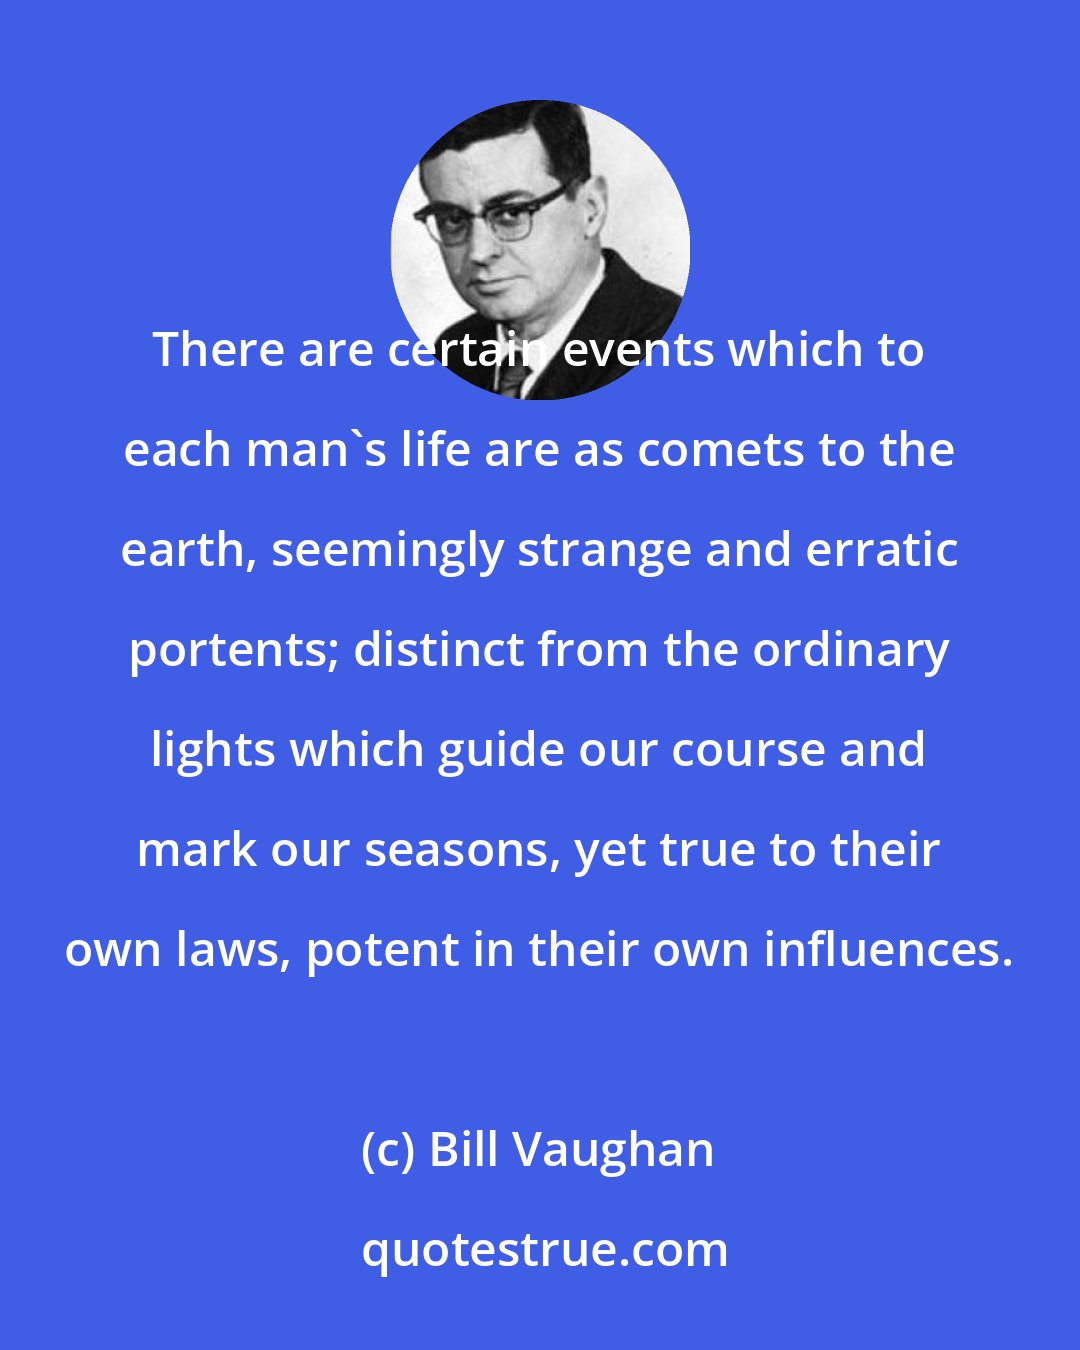 Bill Vaughan: There are certain events which to each man's life are as comets to the earth, seemingly strange and erratic portents; distinct from the ordinary lights which guide our course and mark our seasons, yet true to their own laws, potent in their own influences.